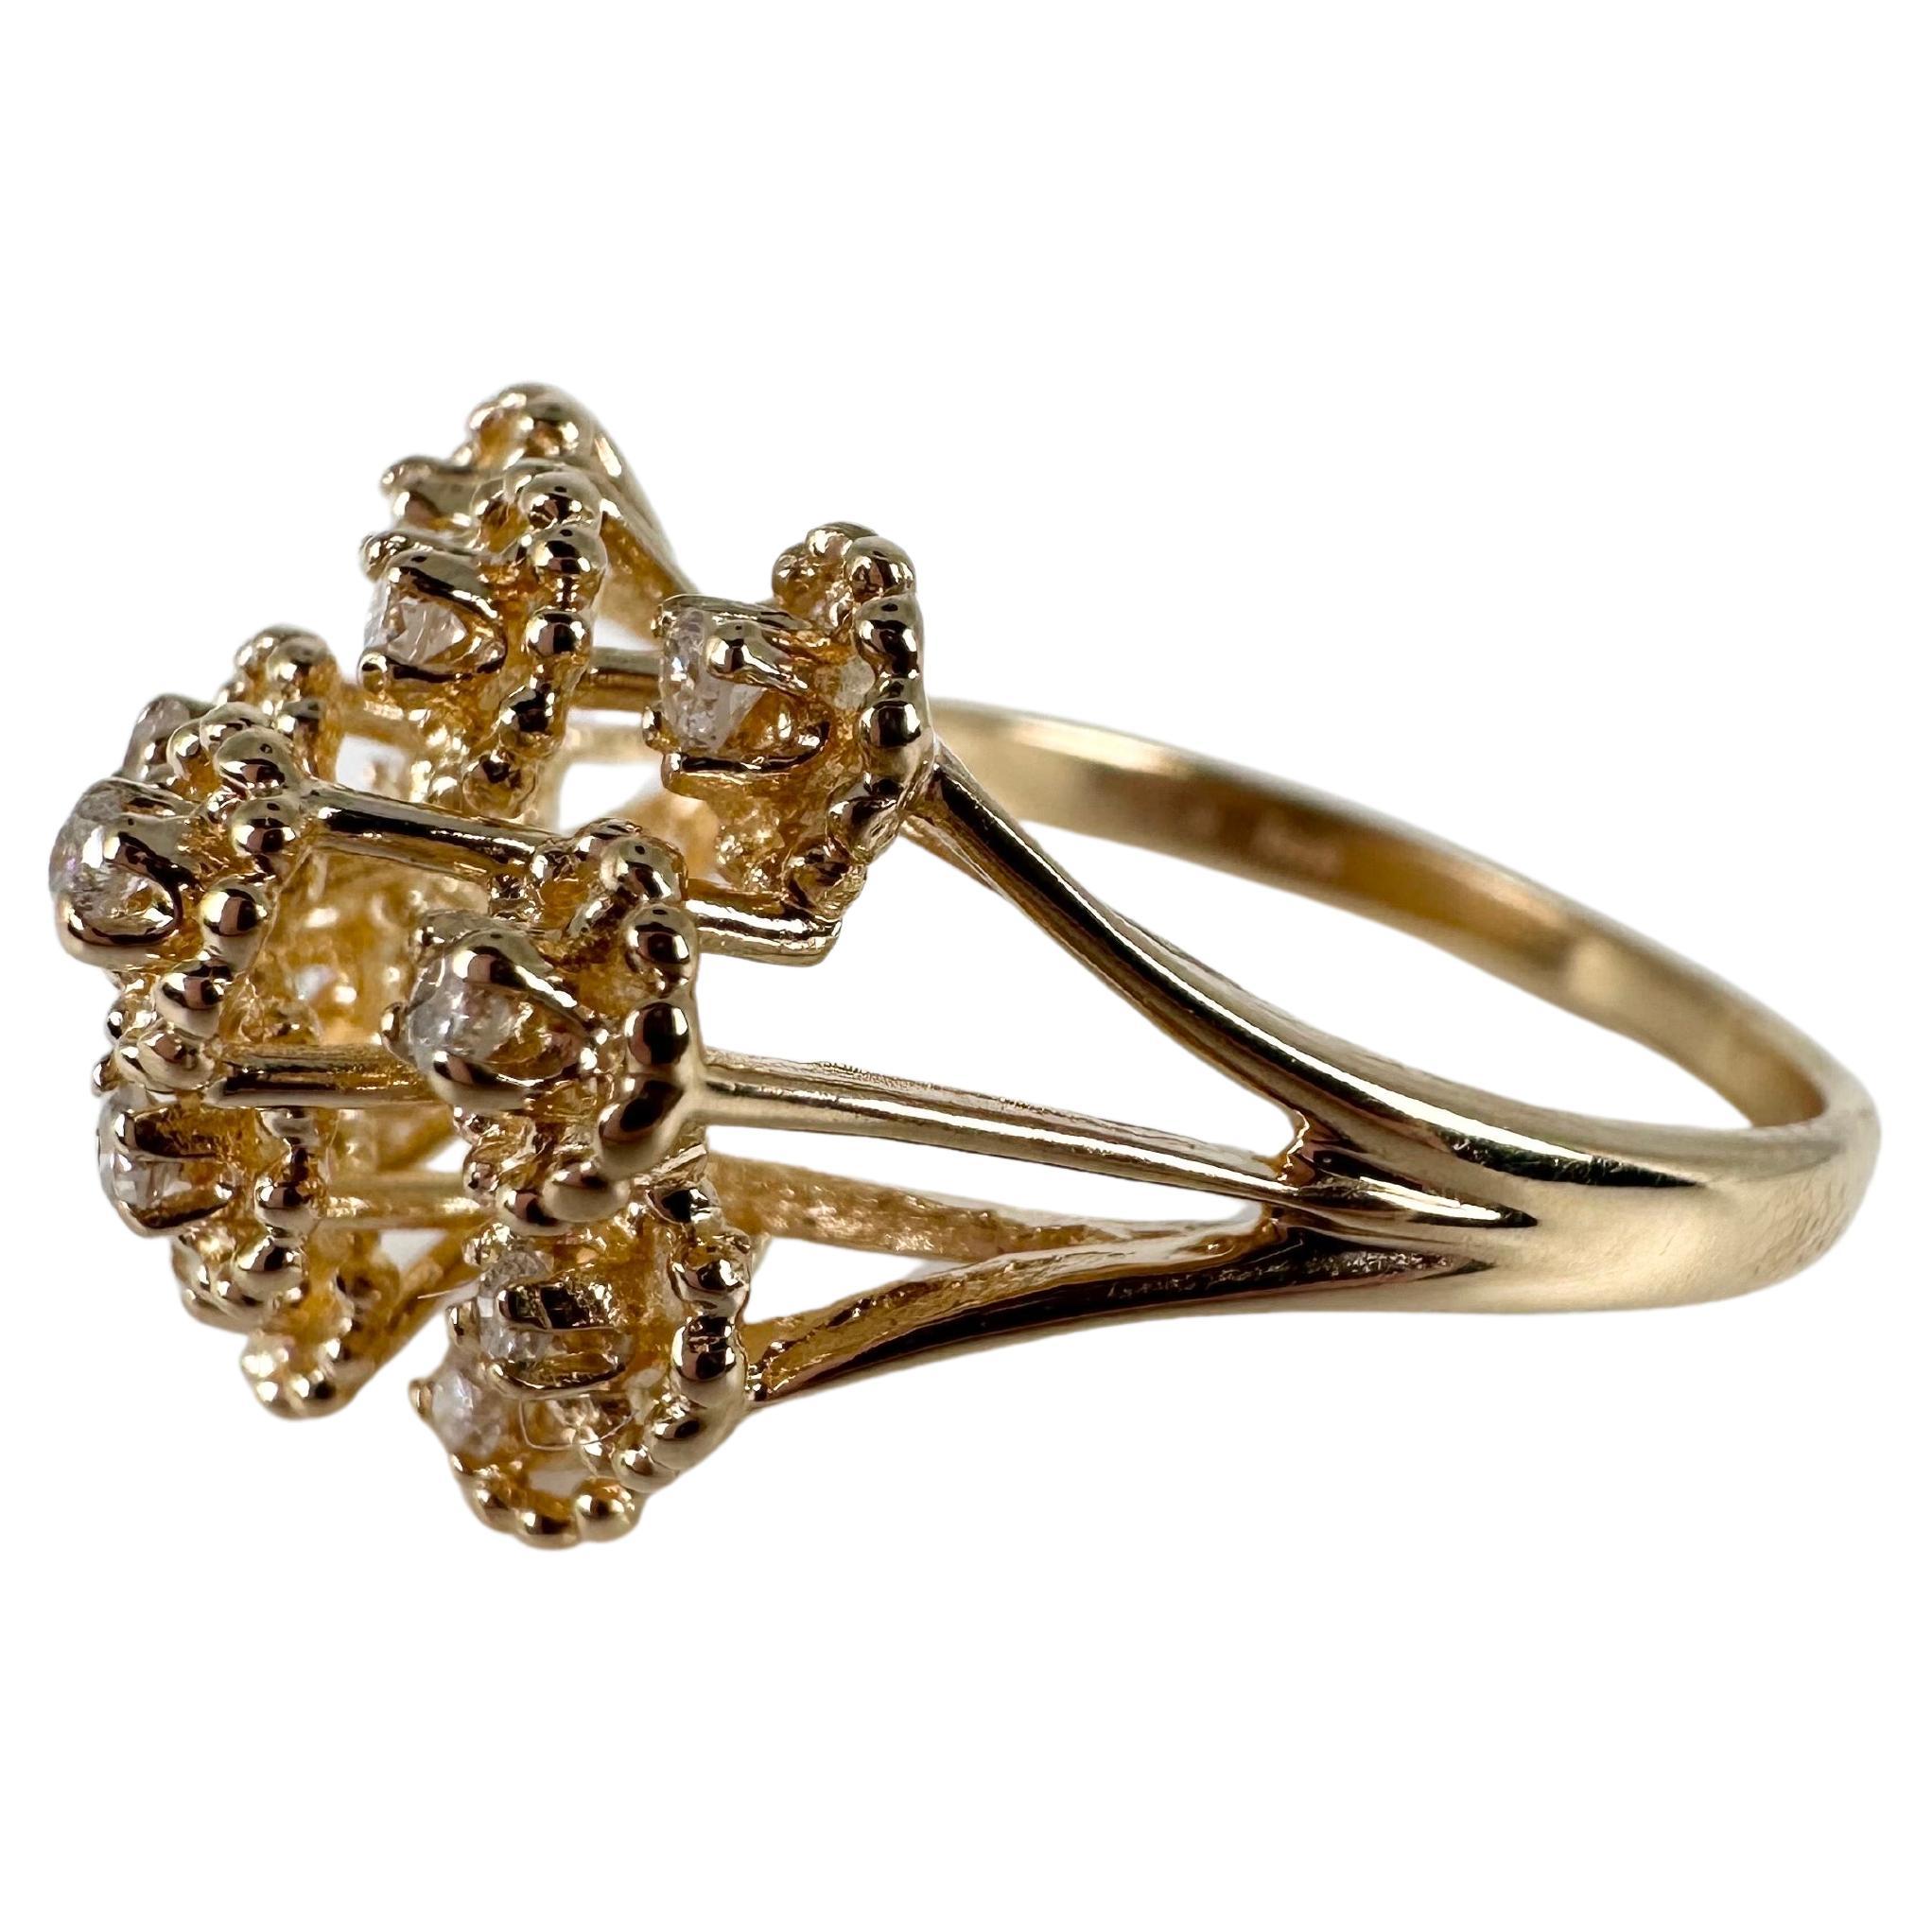 A custom ring made in sno falling design idea. The diamonds are resembling snow falling from the sky. The ring is made in 14KT yellow gold with beautiful white natural diamonds. The ring is a large cocktail style ring in a dome like setting. 

GOLD: